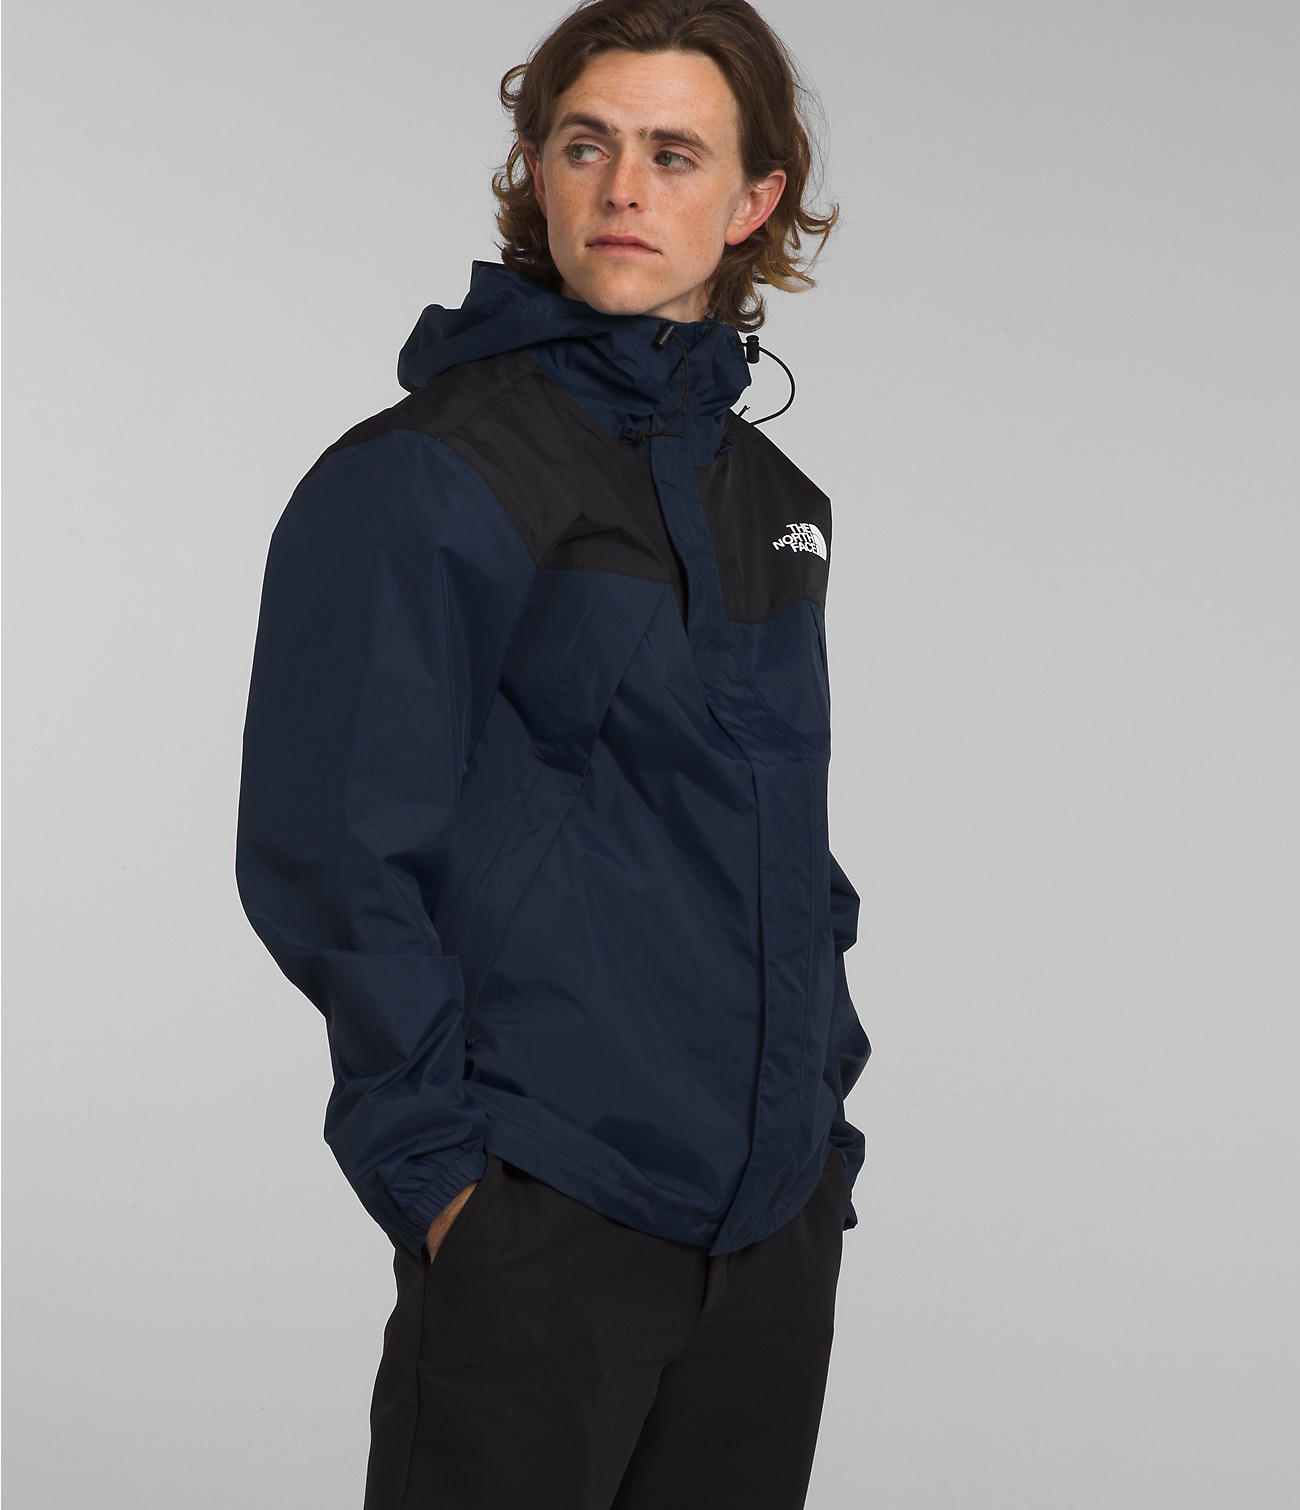 Unlock Wilderness' choice in the L.L.Bean Vs North Face comparison, the Antora Jacket by The North Face